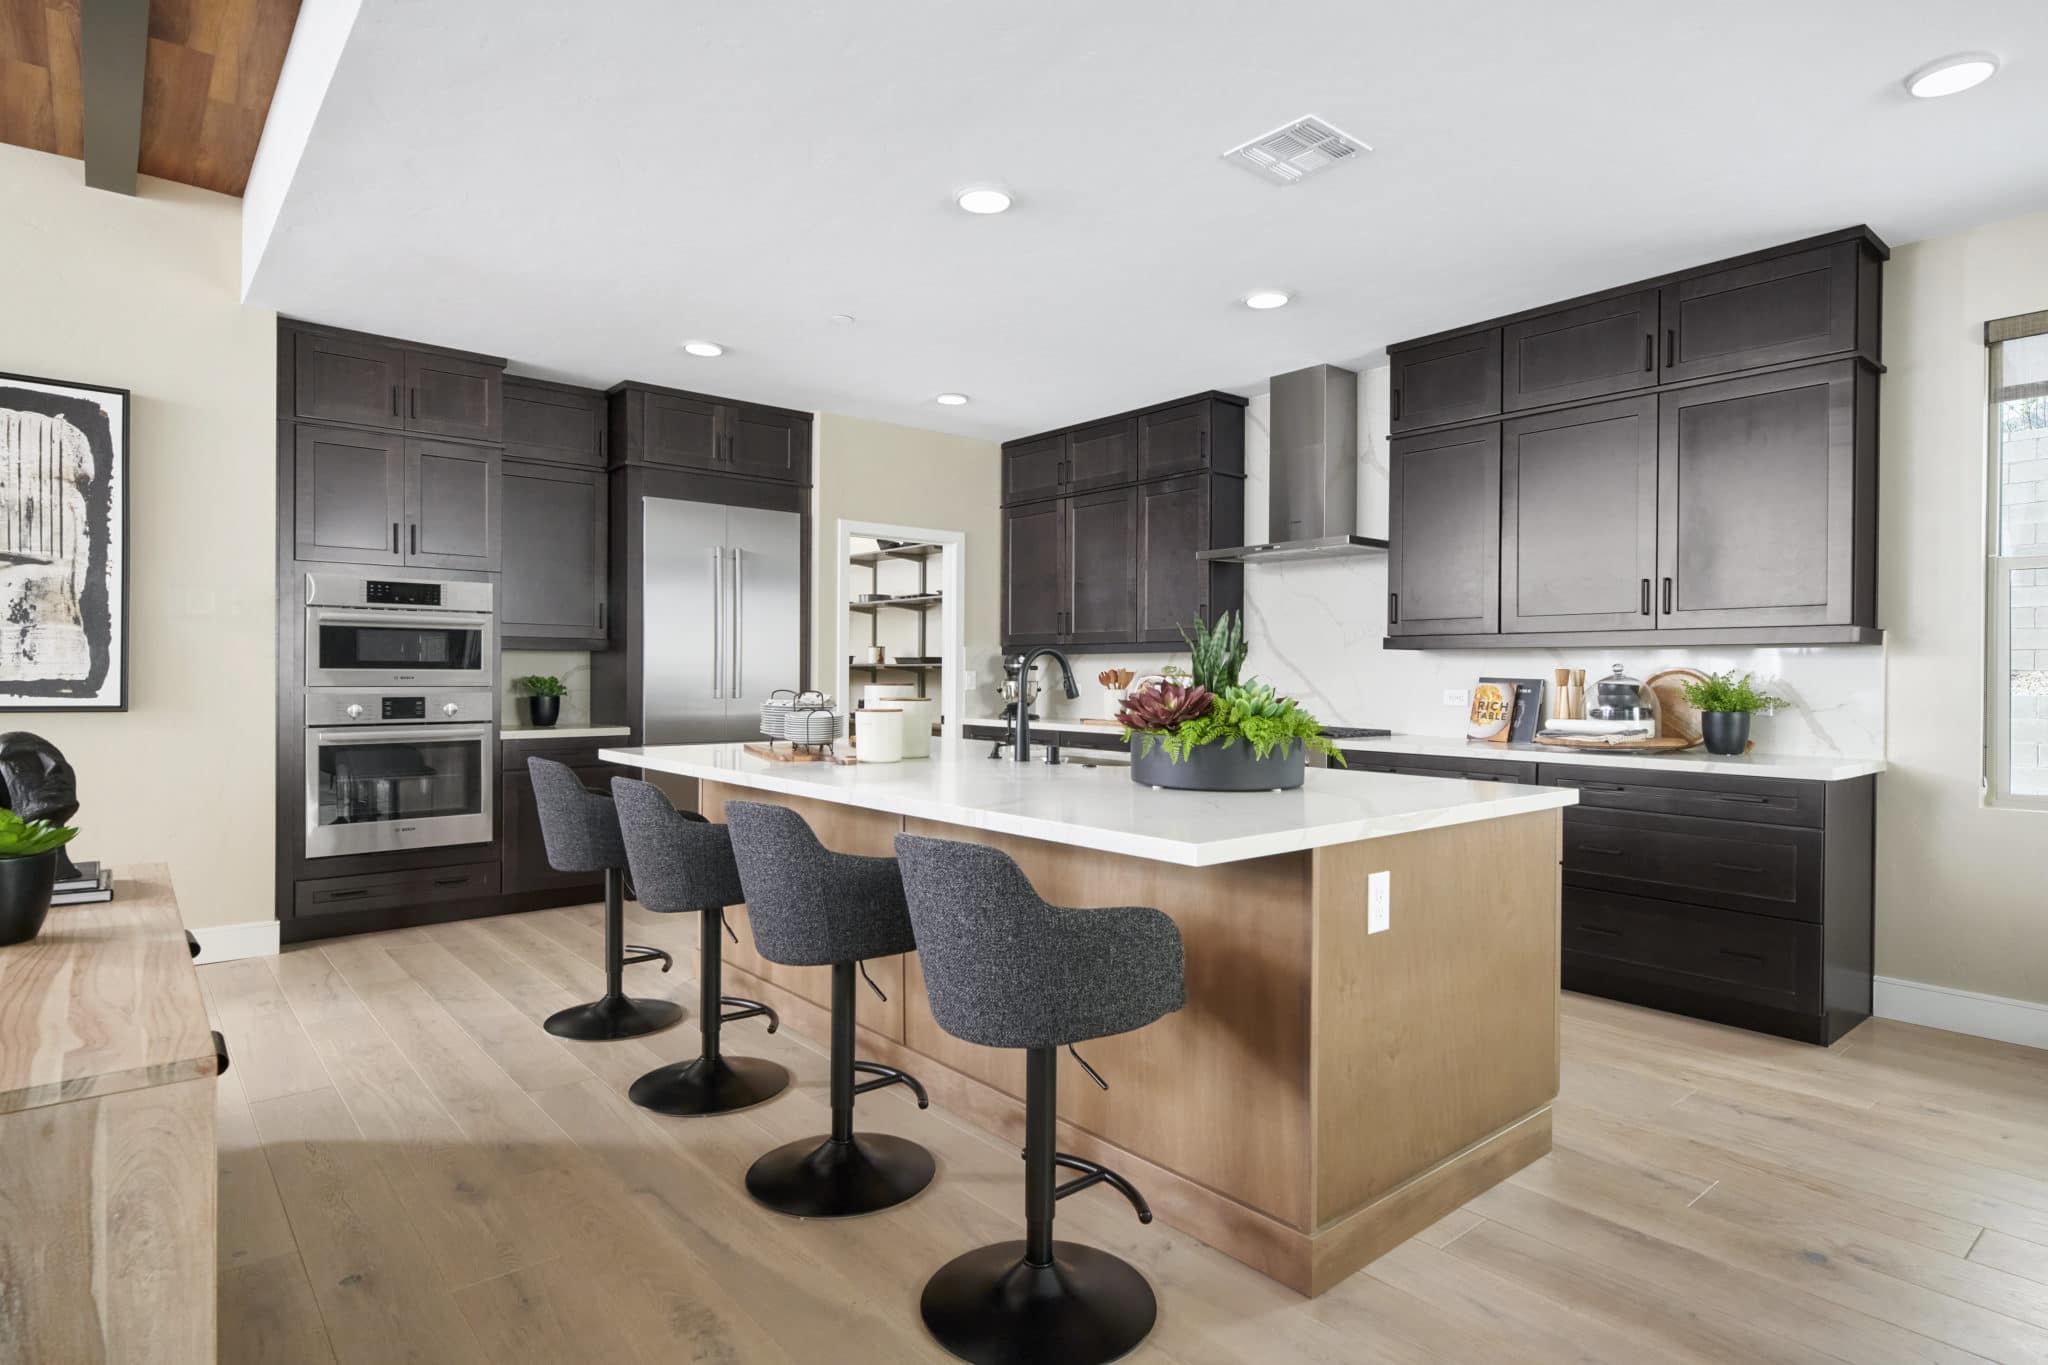 Kitchen of Plan 1 at Kings Canyon by Tri Pointe Homes